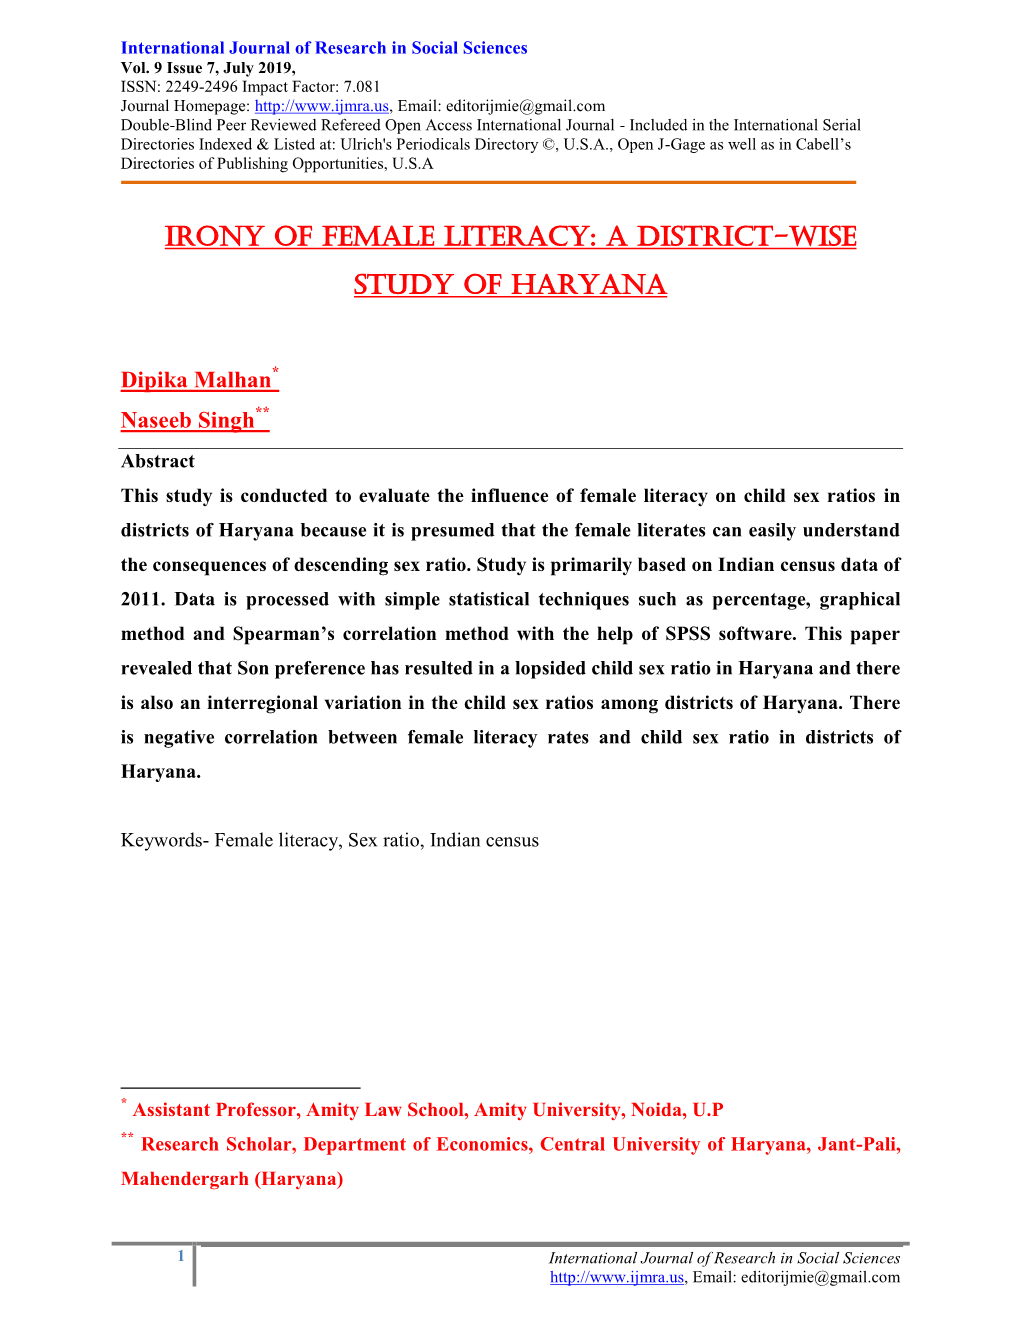 Irony of Female Literacy: a District-Wise Study of Haryana